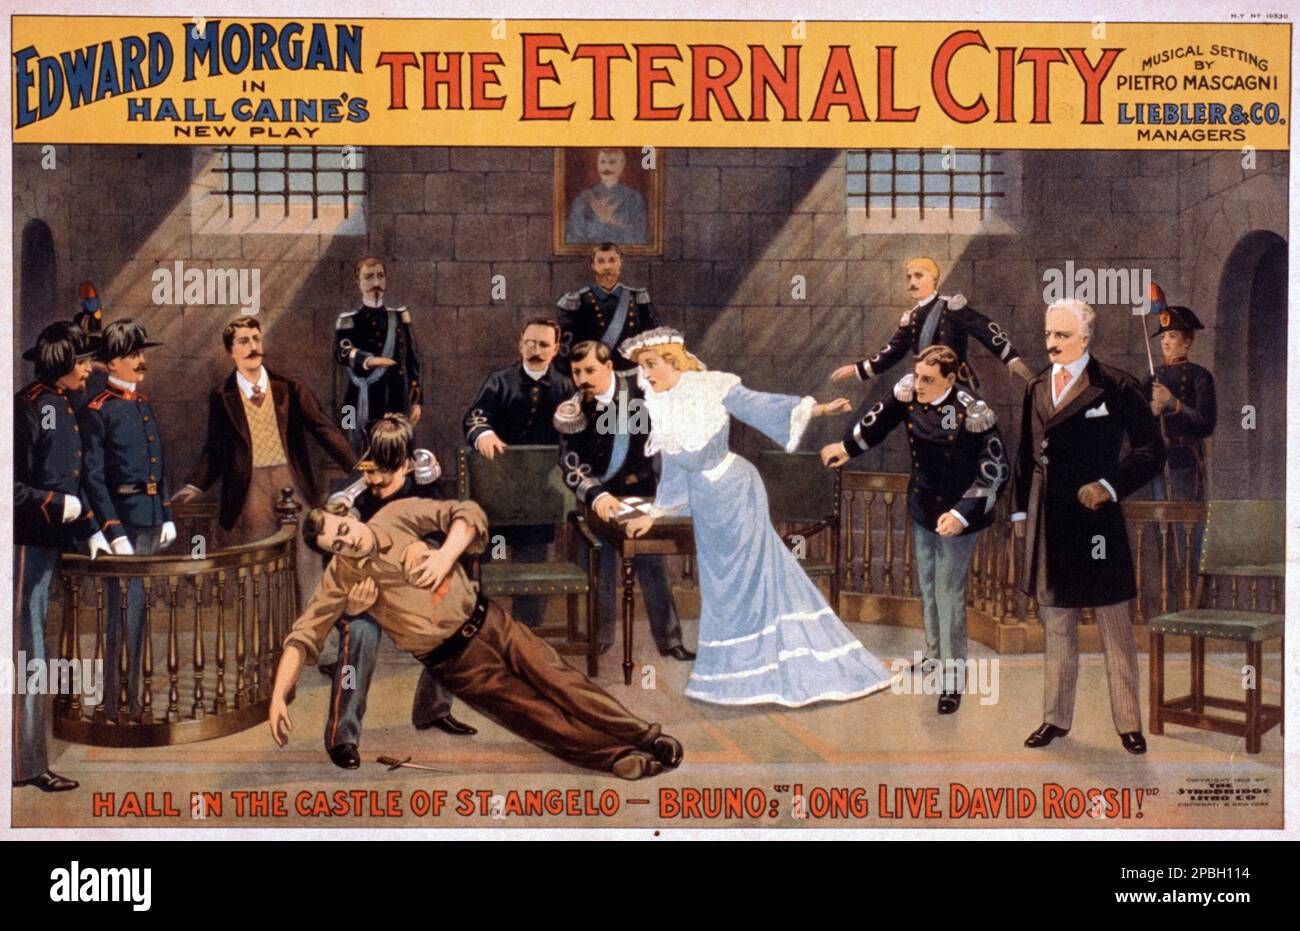 1903 , USA  : The actor Edward Morgan in Hall Caine's new play, THE ETERNAL CITY,  musical setting by Pietro Mascagni , ambiented in Italy at Castel Sant'Angelo in Rome . The british writer Sir Thomas Henry HALL CAINE ( 1853 - 1931 ). - TEATRO - THEATER - THEATRE - locandina pubblicitaria - poster - advertising - LETTERATO - SCRITTORE - LETTERATURA - Literature - processo - trial - carabiniere - carabinieri  ----  Archivio GBB Stock Photo